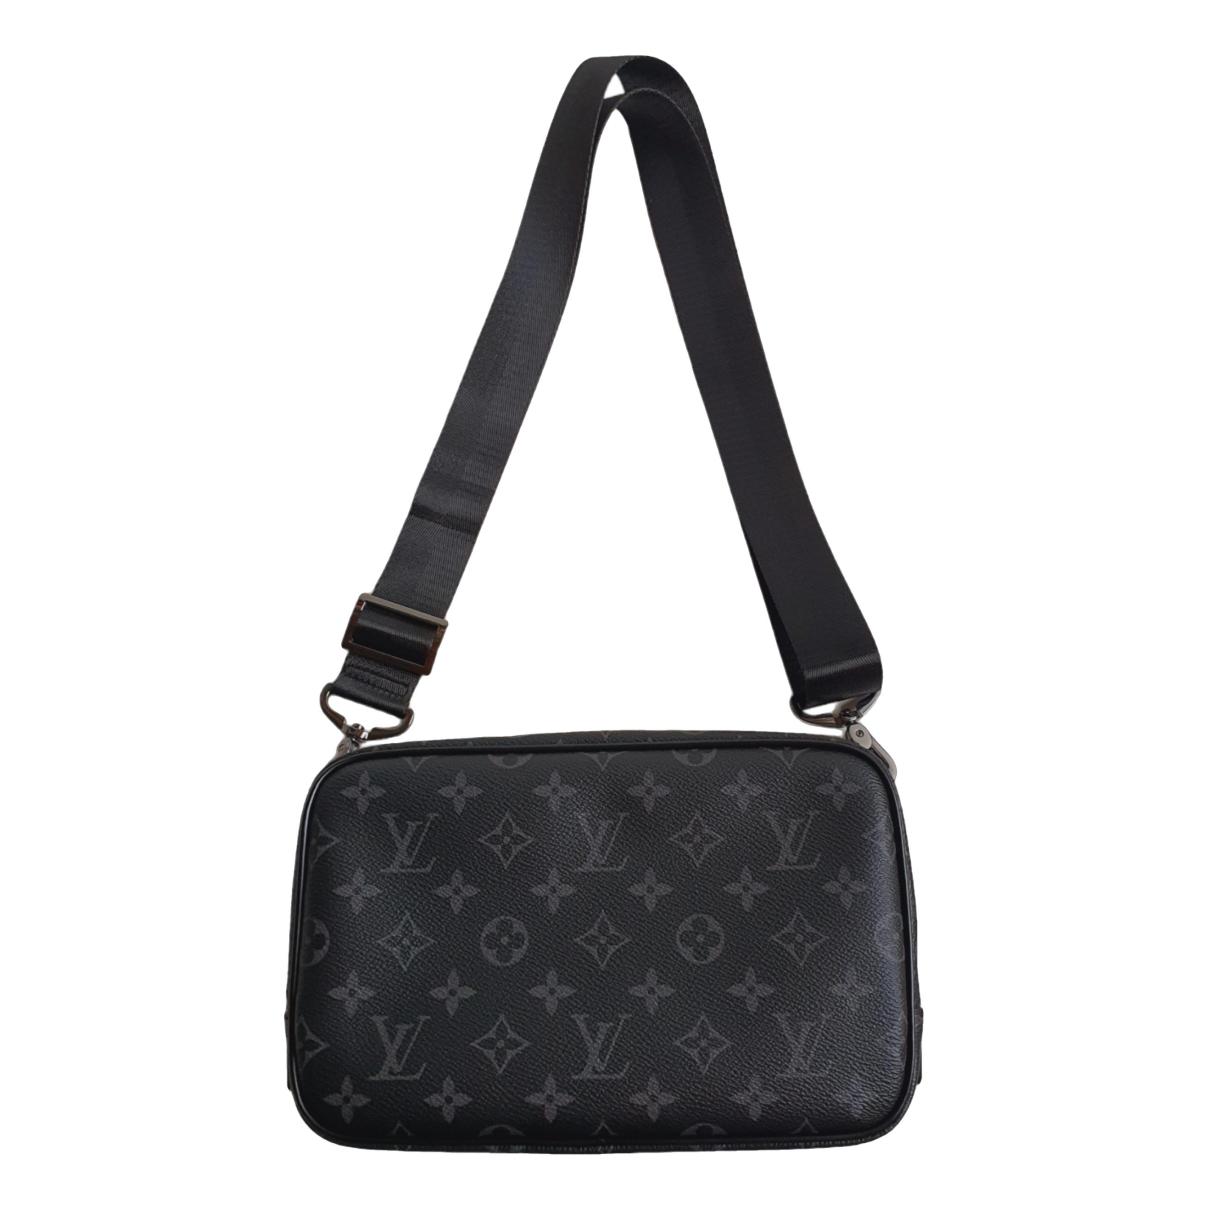 District leather bag Louis Vuitton Grey in Leather - 20469622